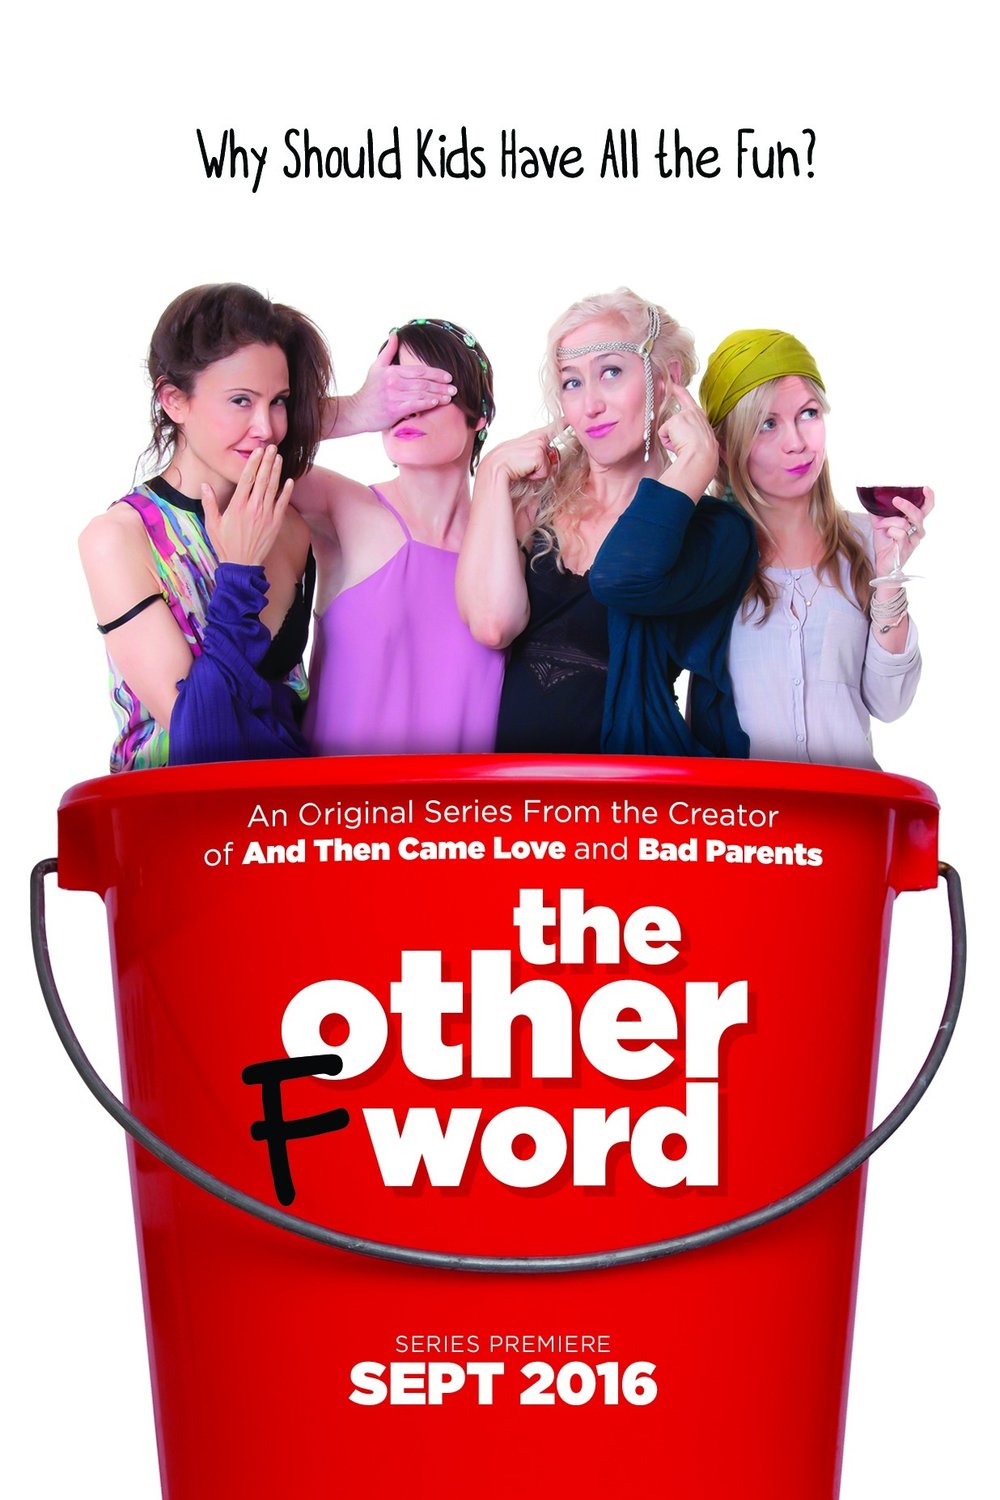 Poster of the movie The Other F Word